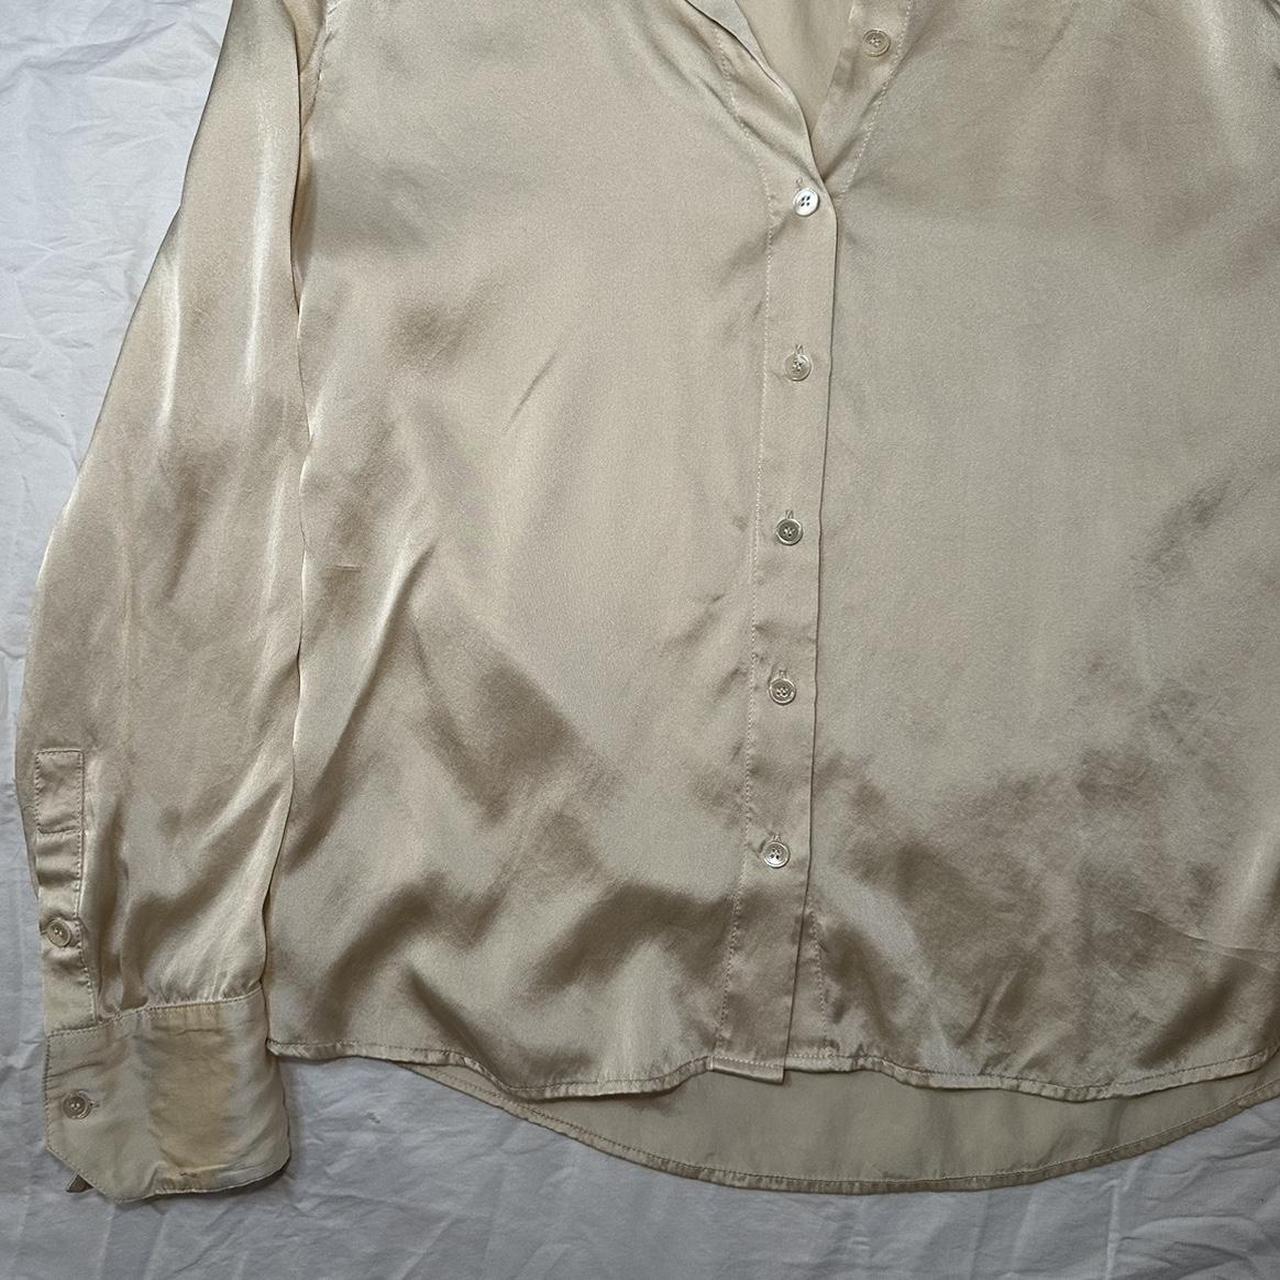 Reformation Women's Cream and Tan Blouse (4)